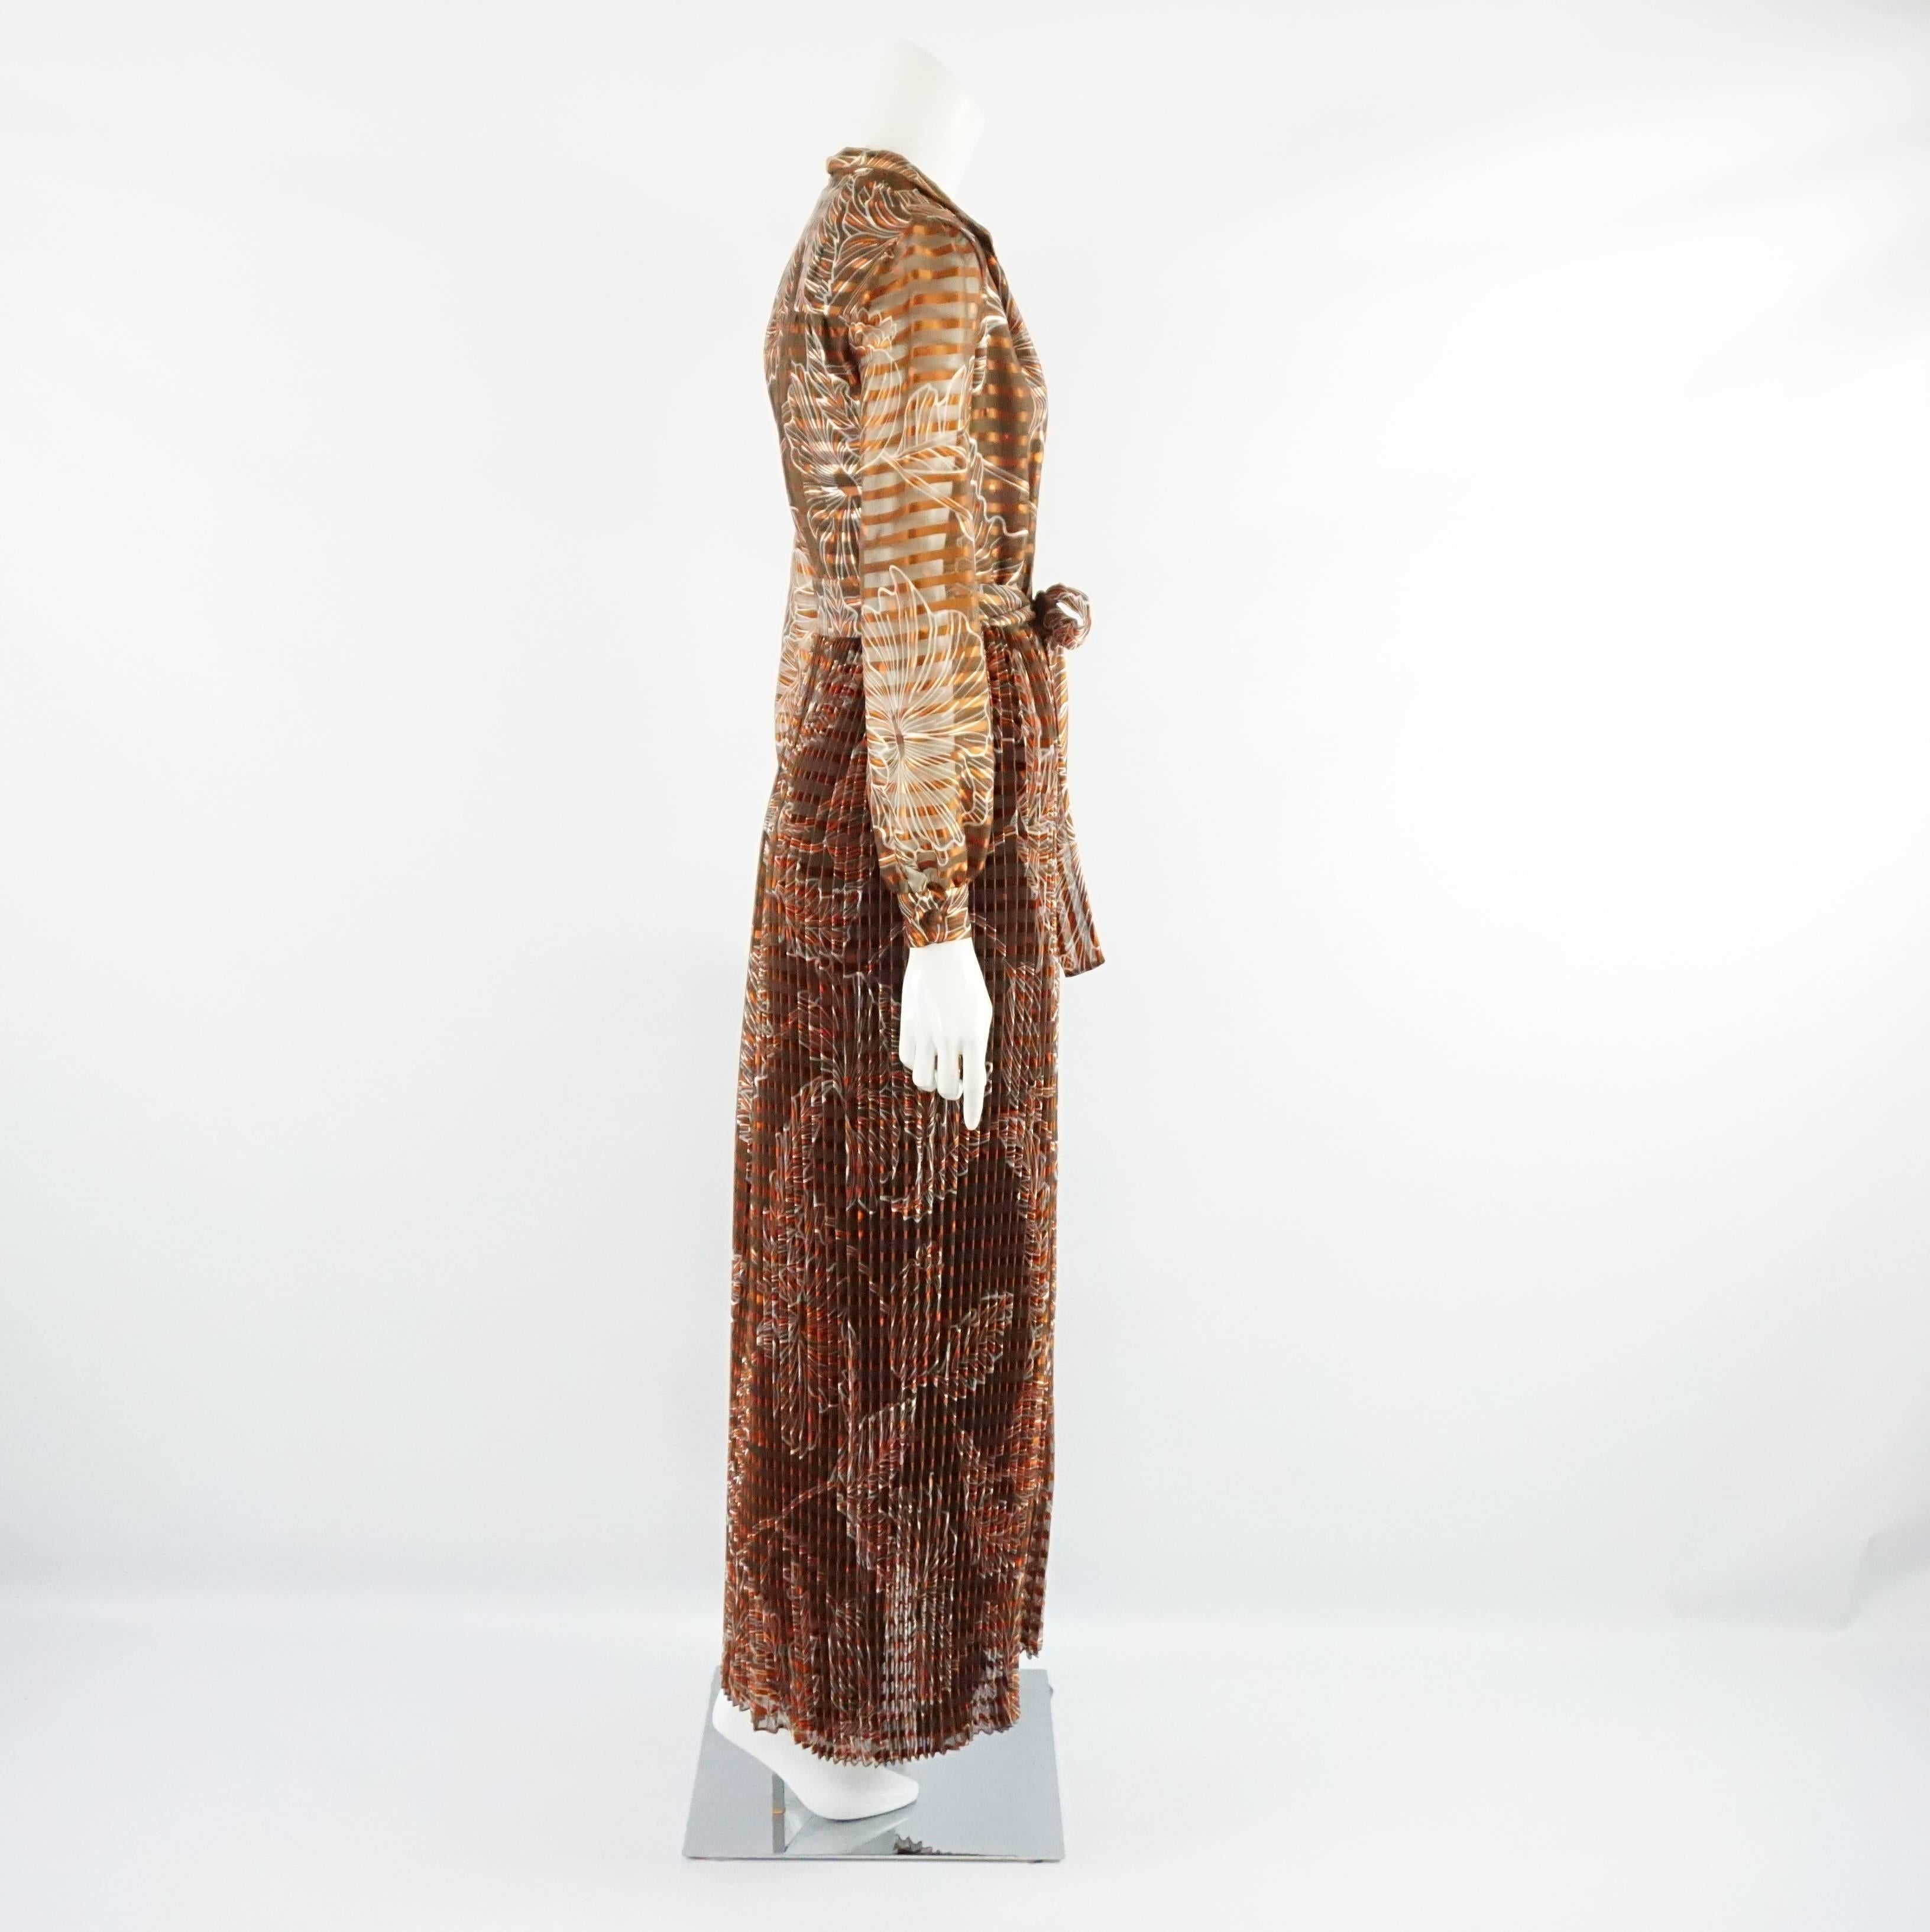 This Oscar de la Renta vintage rust colored silk organza gown features a print. There is a waist tie. This gown is in very good condition with minor overall wear.

Measurements
Shoulder to Shoulder: 15.5"
Sleeve Length: 24.5"
Bust: